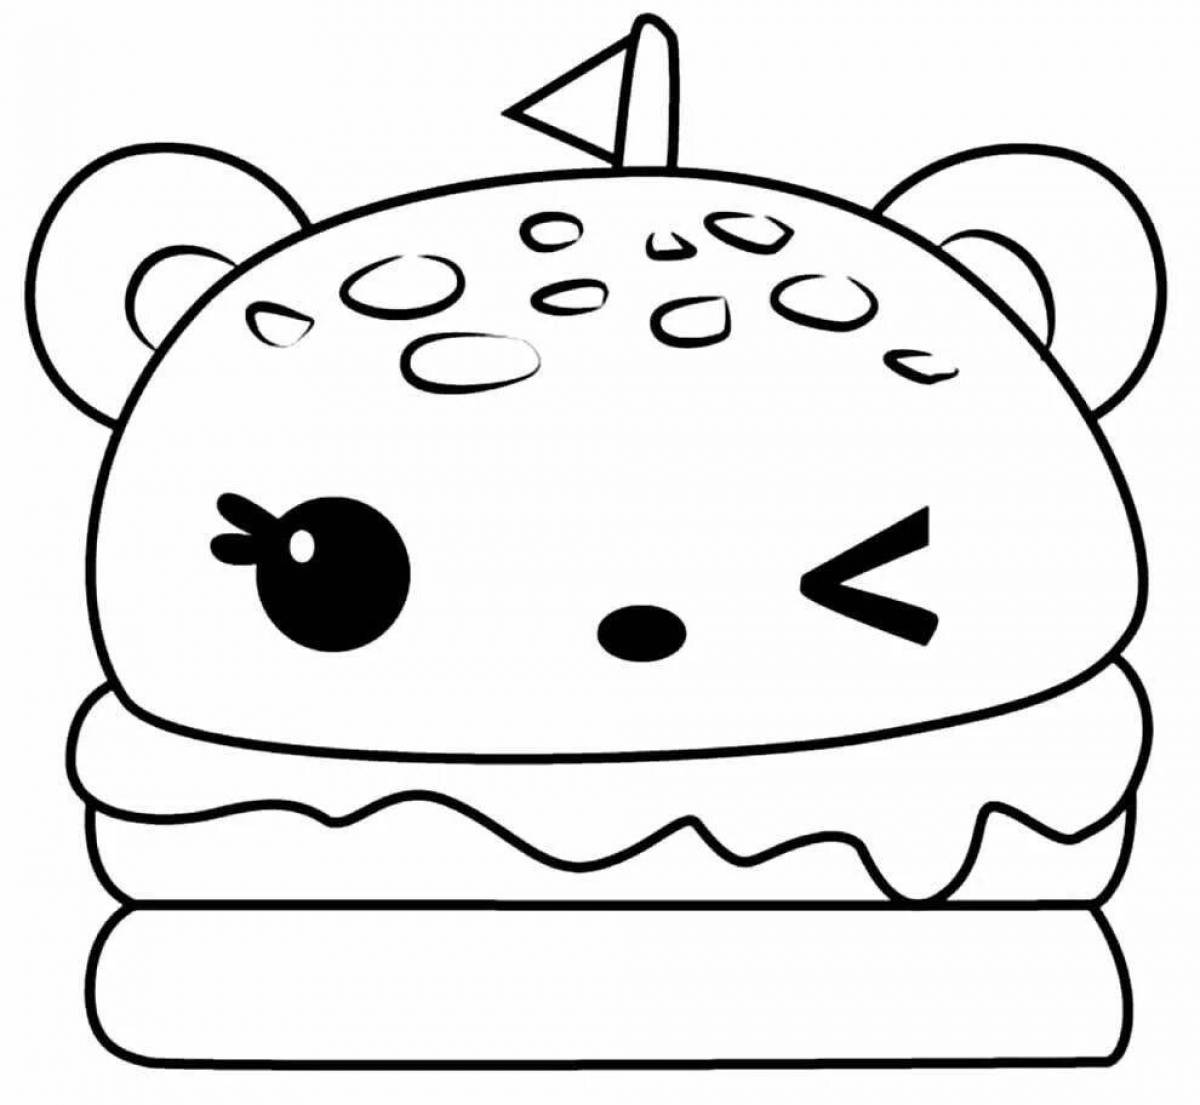 Silly coloring cute food with eyes